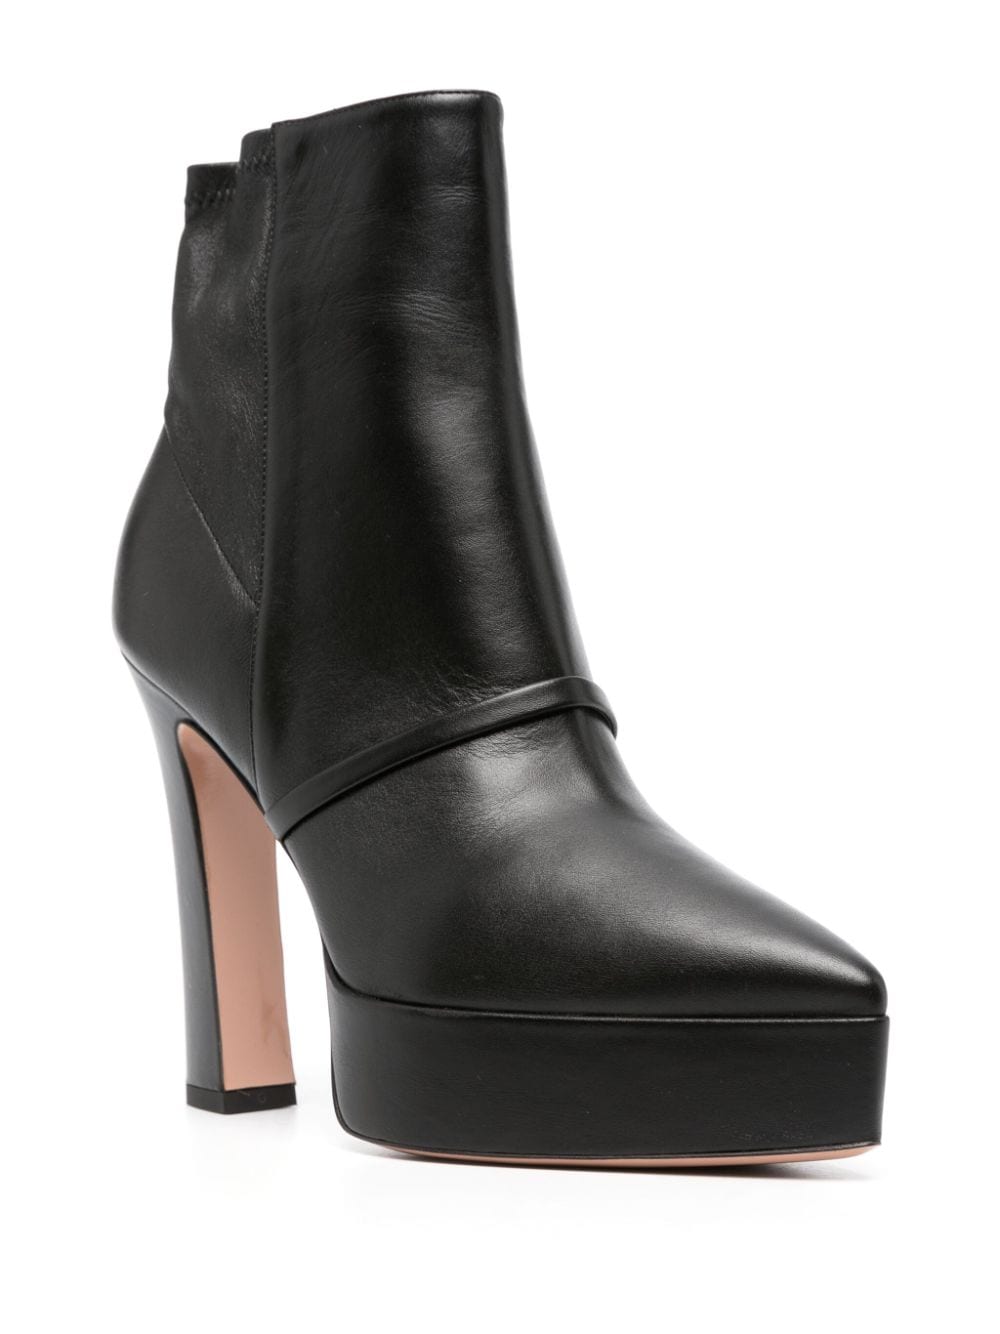 Shop Malone Souliers Rue 125 High Heel Ankle Boots